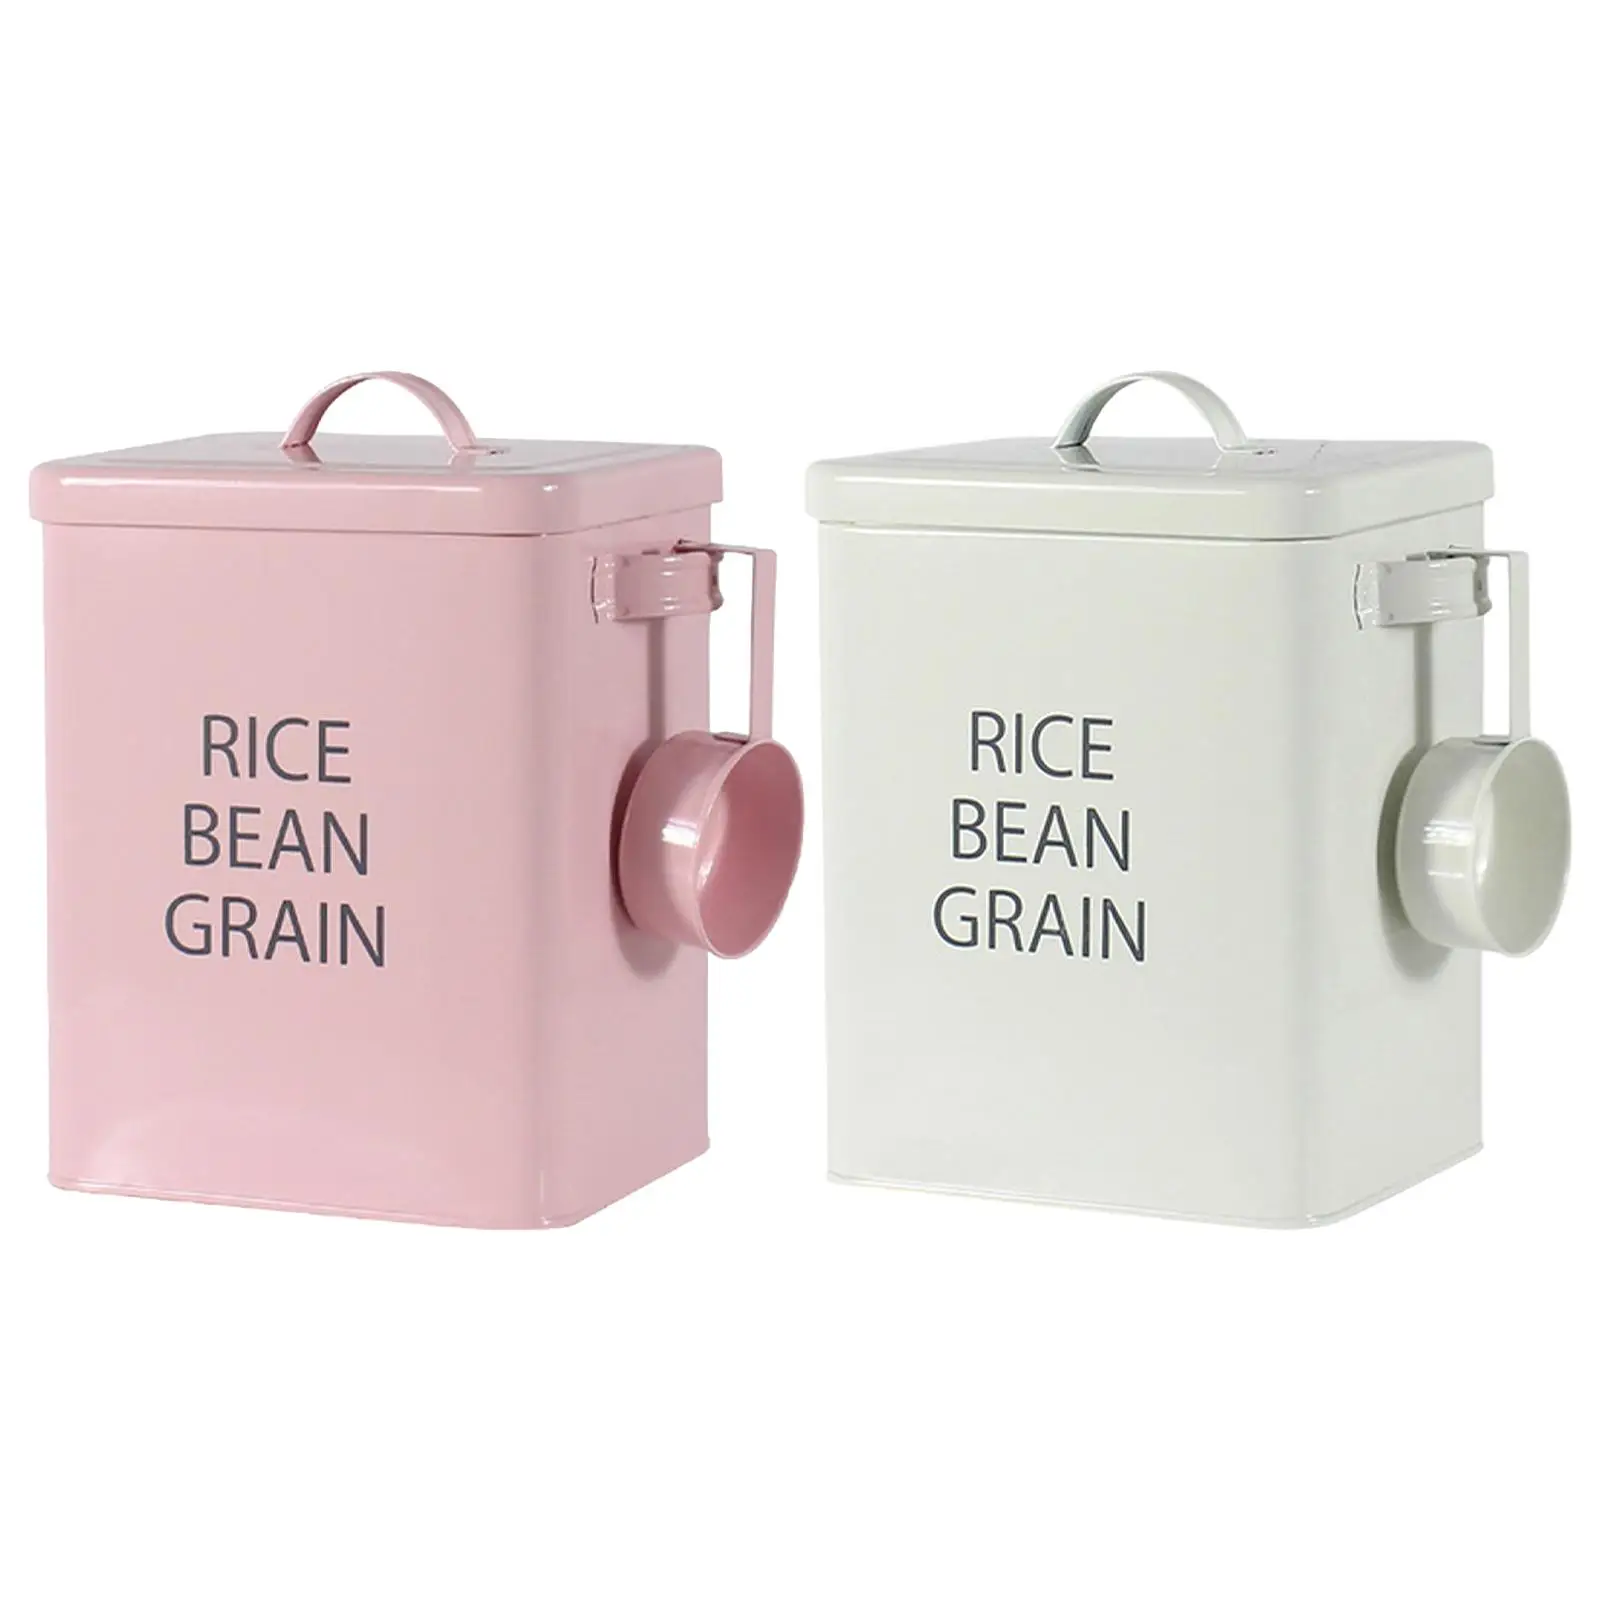 Multifunctional Storage Bucket Household   Lid for Laundry  Cat Food Dog Food Dry Food  Container